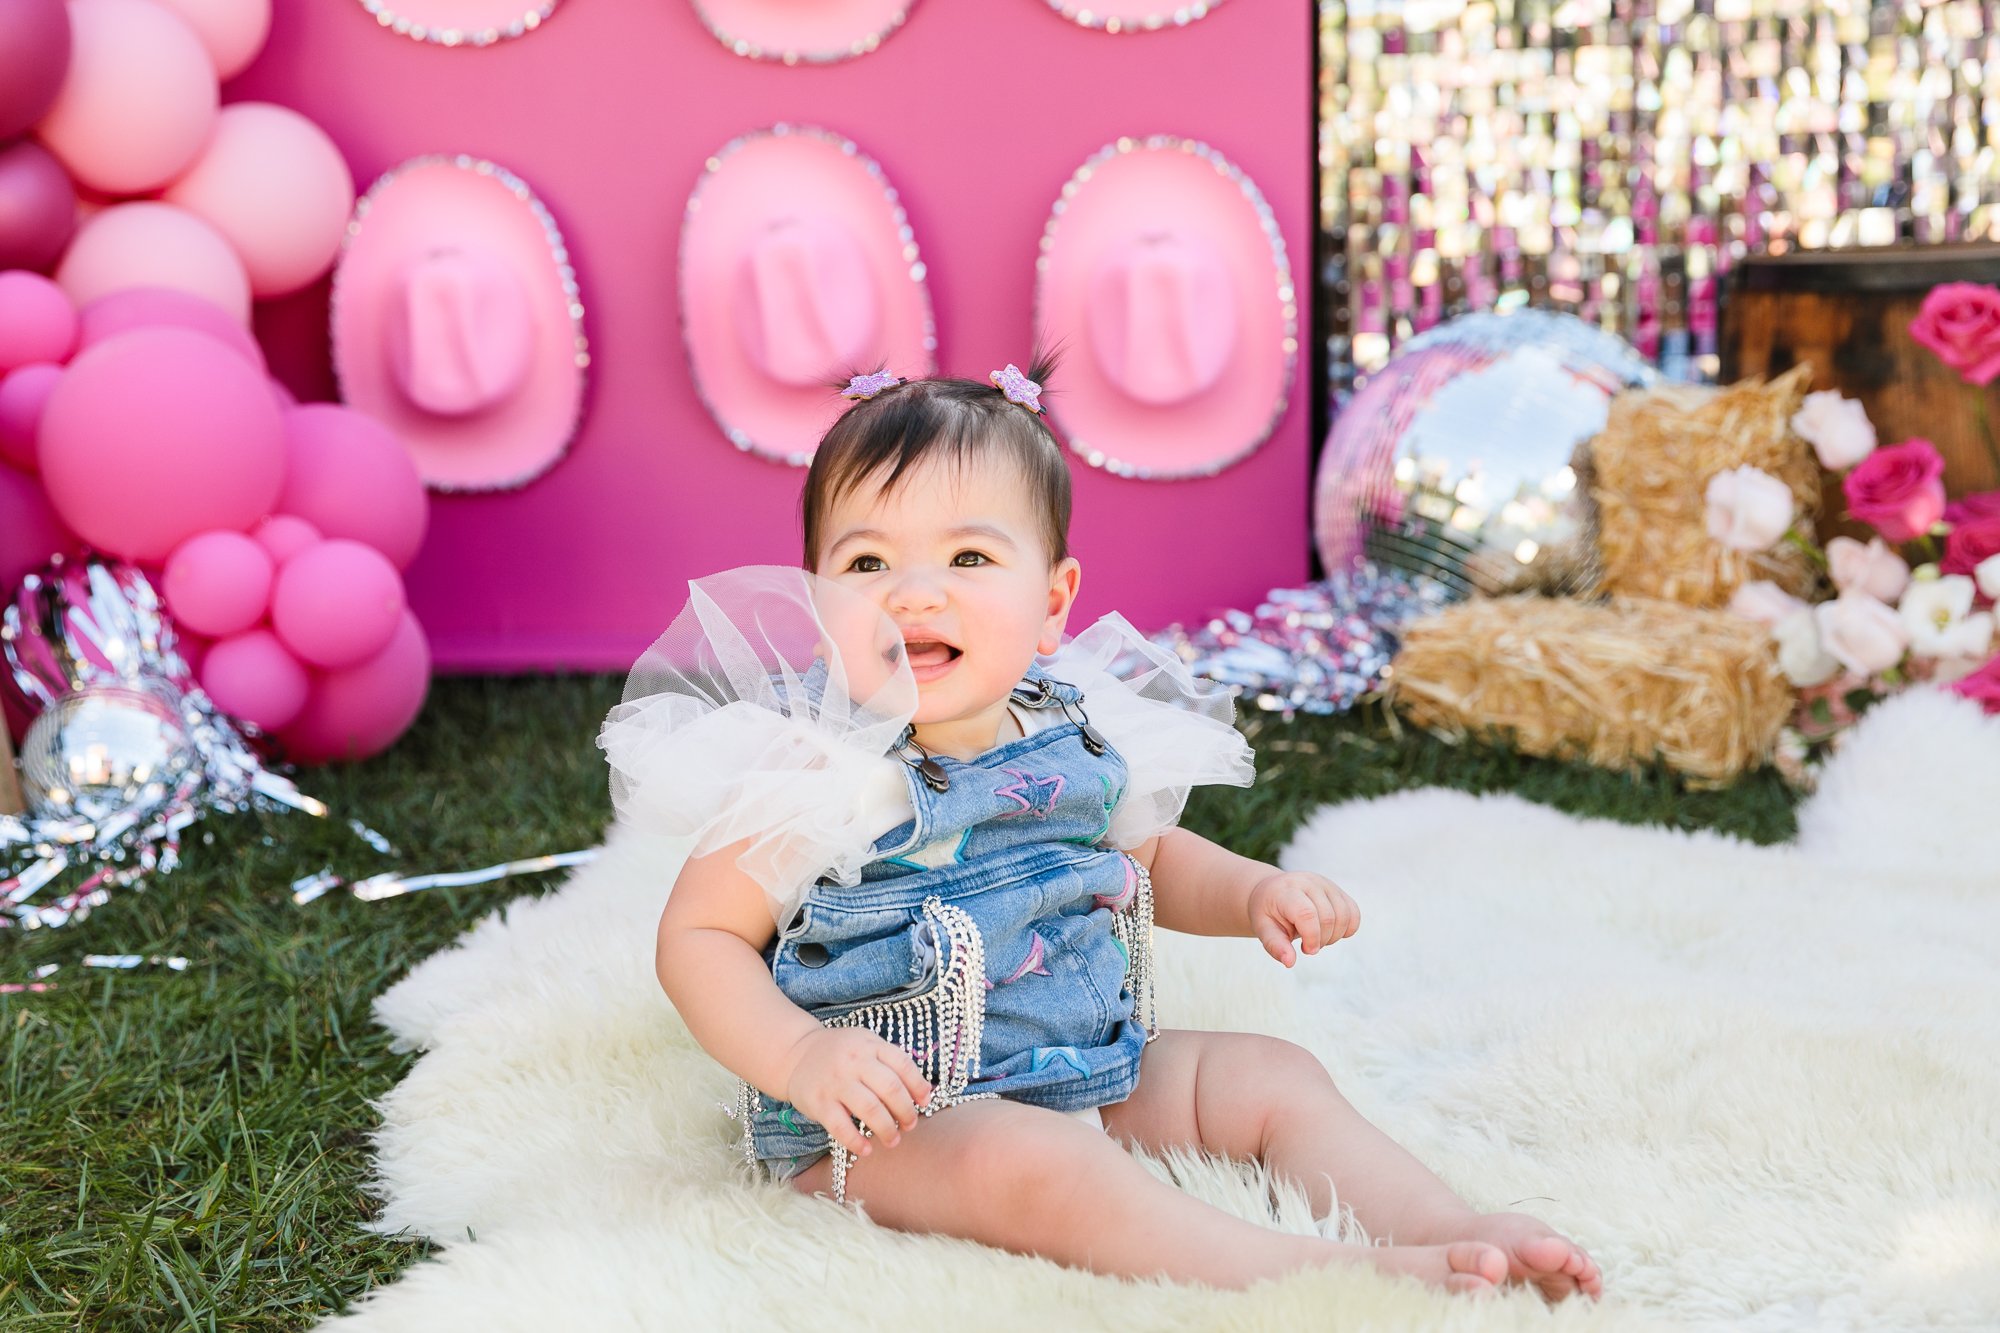 Los_Angeles_Party_Photographer_Luxury_Event_First_Birthday_Baby_Sherwood_Beverly_Hills_Cowboy_Disco_Theme_Girl_Child_Family_Photography-0246.jpg